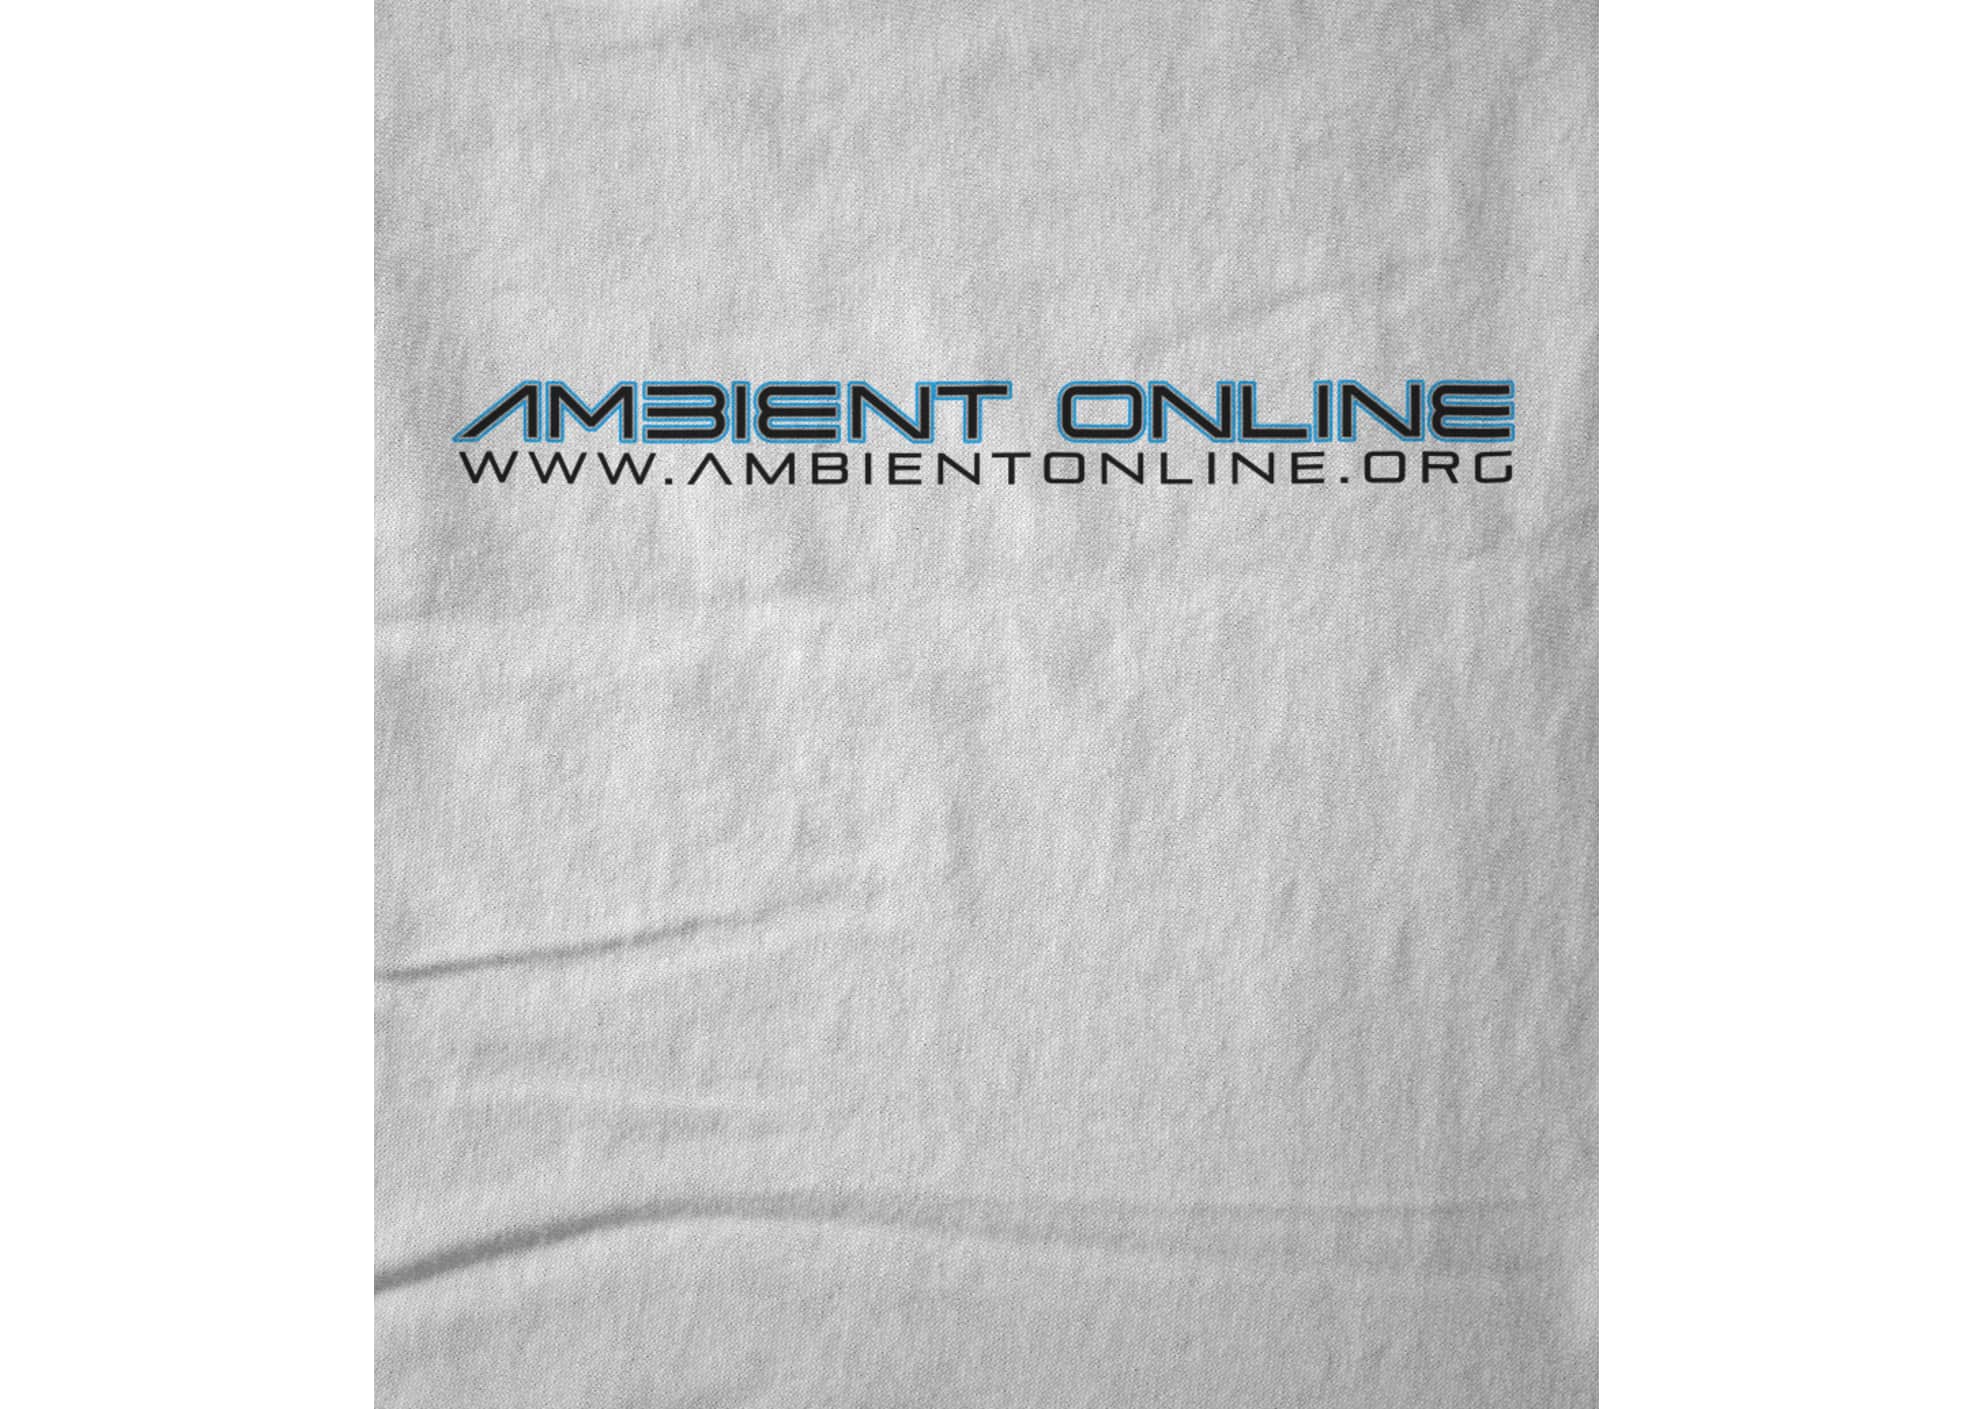 Ambient online ao main logo new 1576264540